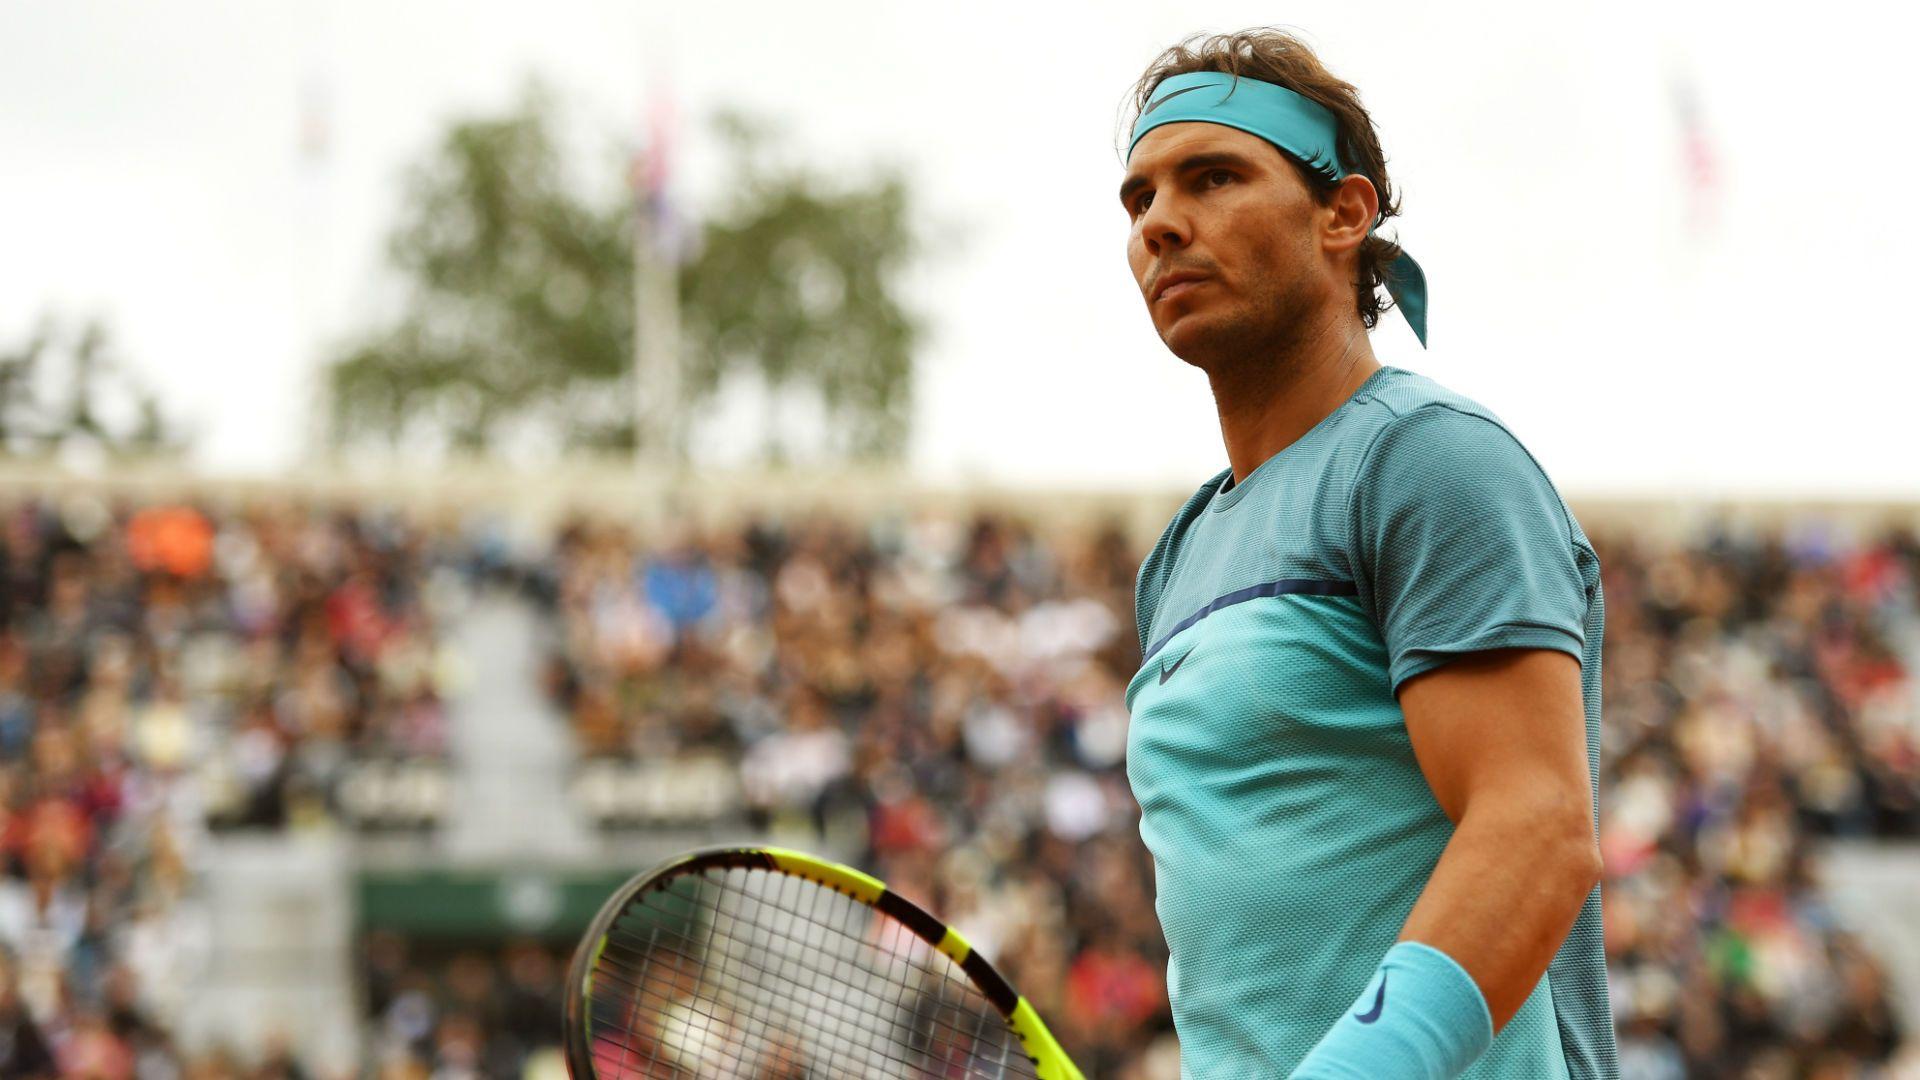 Roland Garros R2: What time does Rafael Nadal play against Facundo